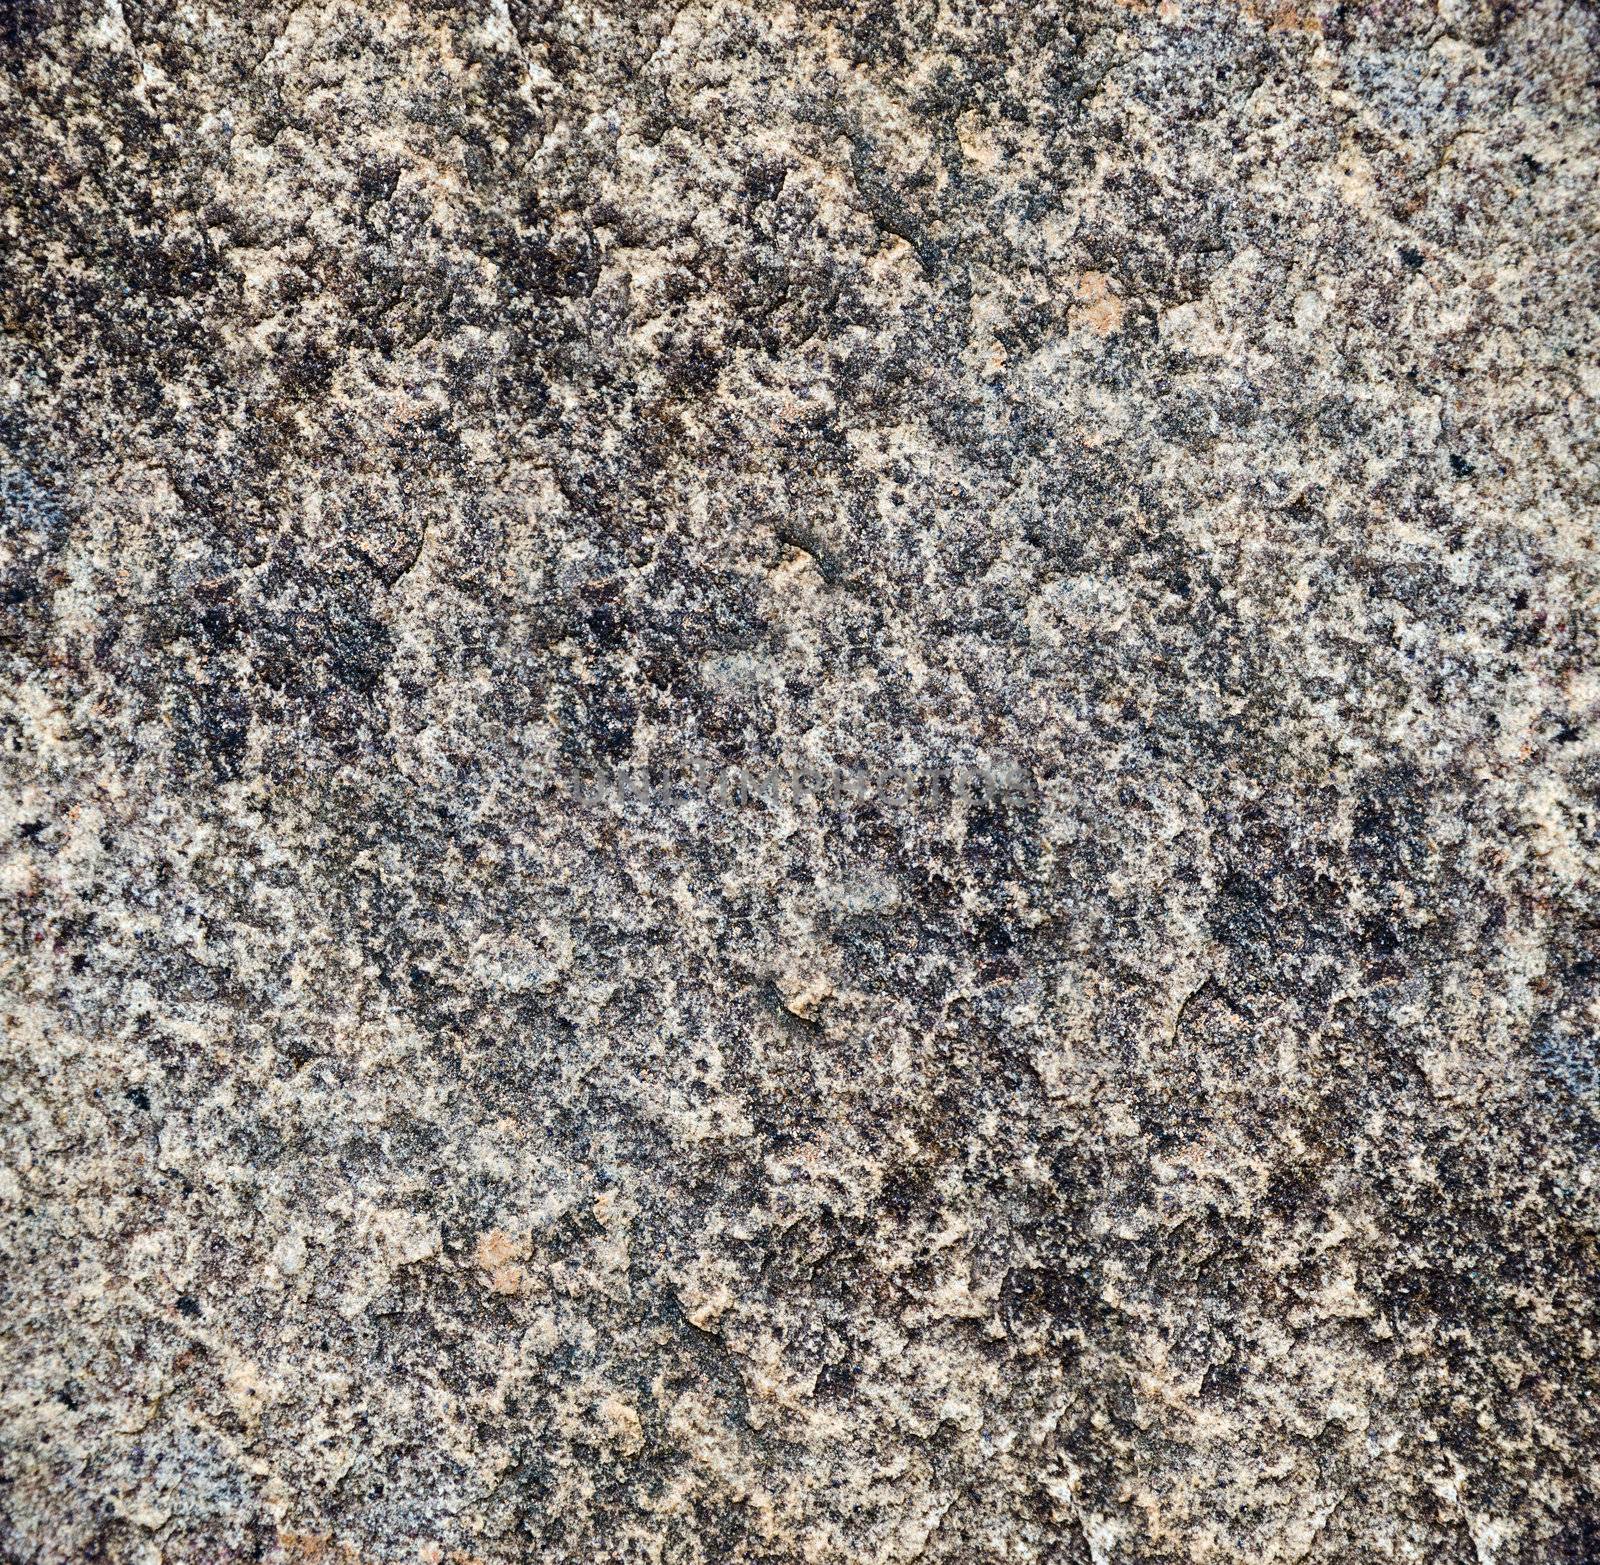 surface of volcanic rock that is subjected to erosion